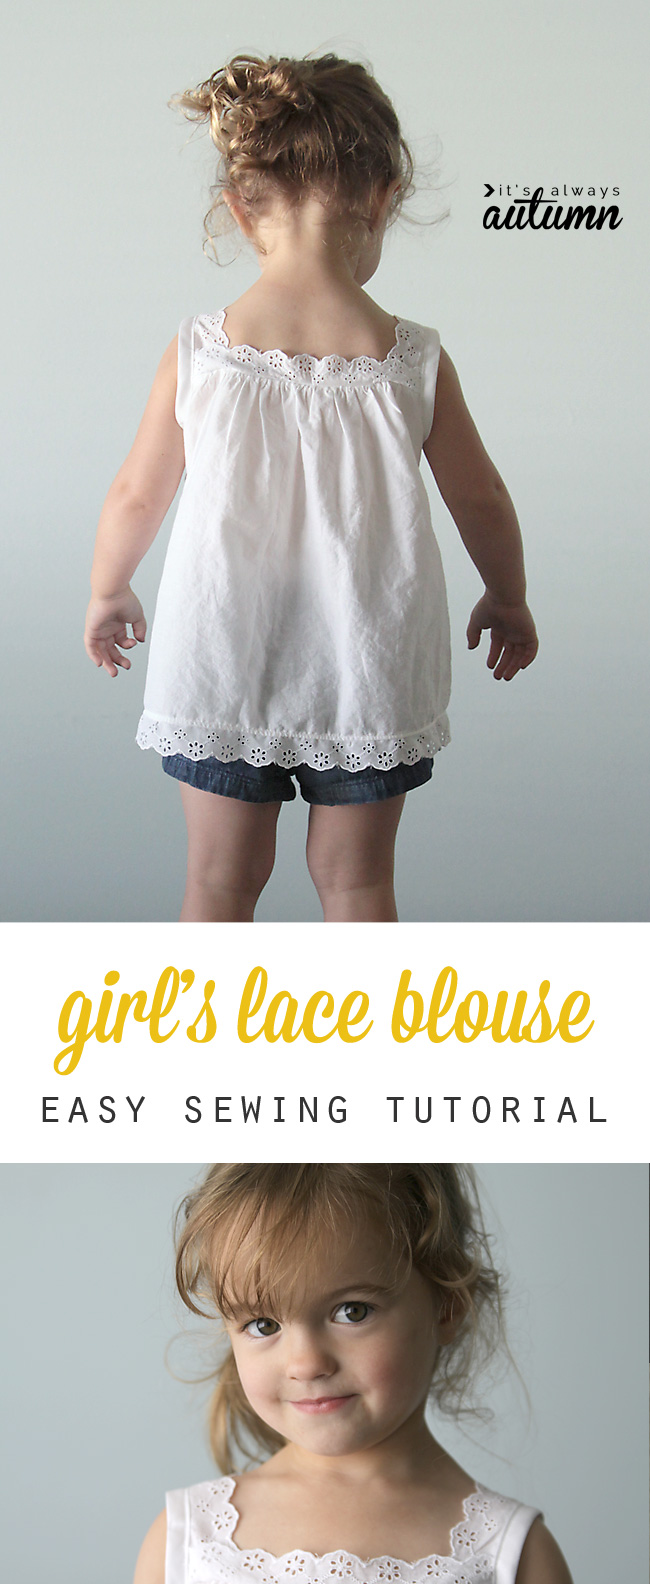 This is beautiful! The sewing tutorial actually looks pretty easy - I think I'm going to try it.